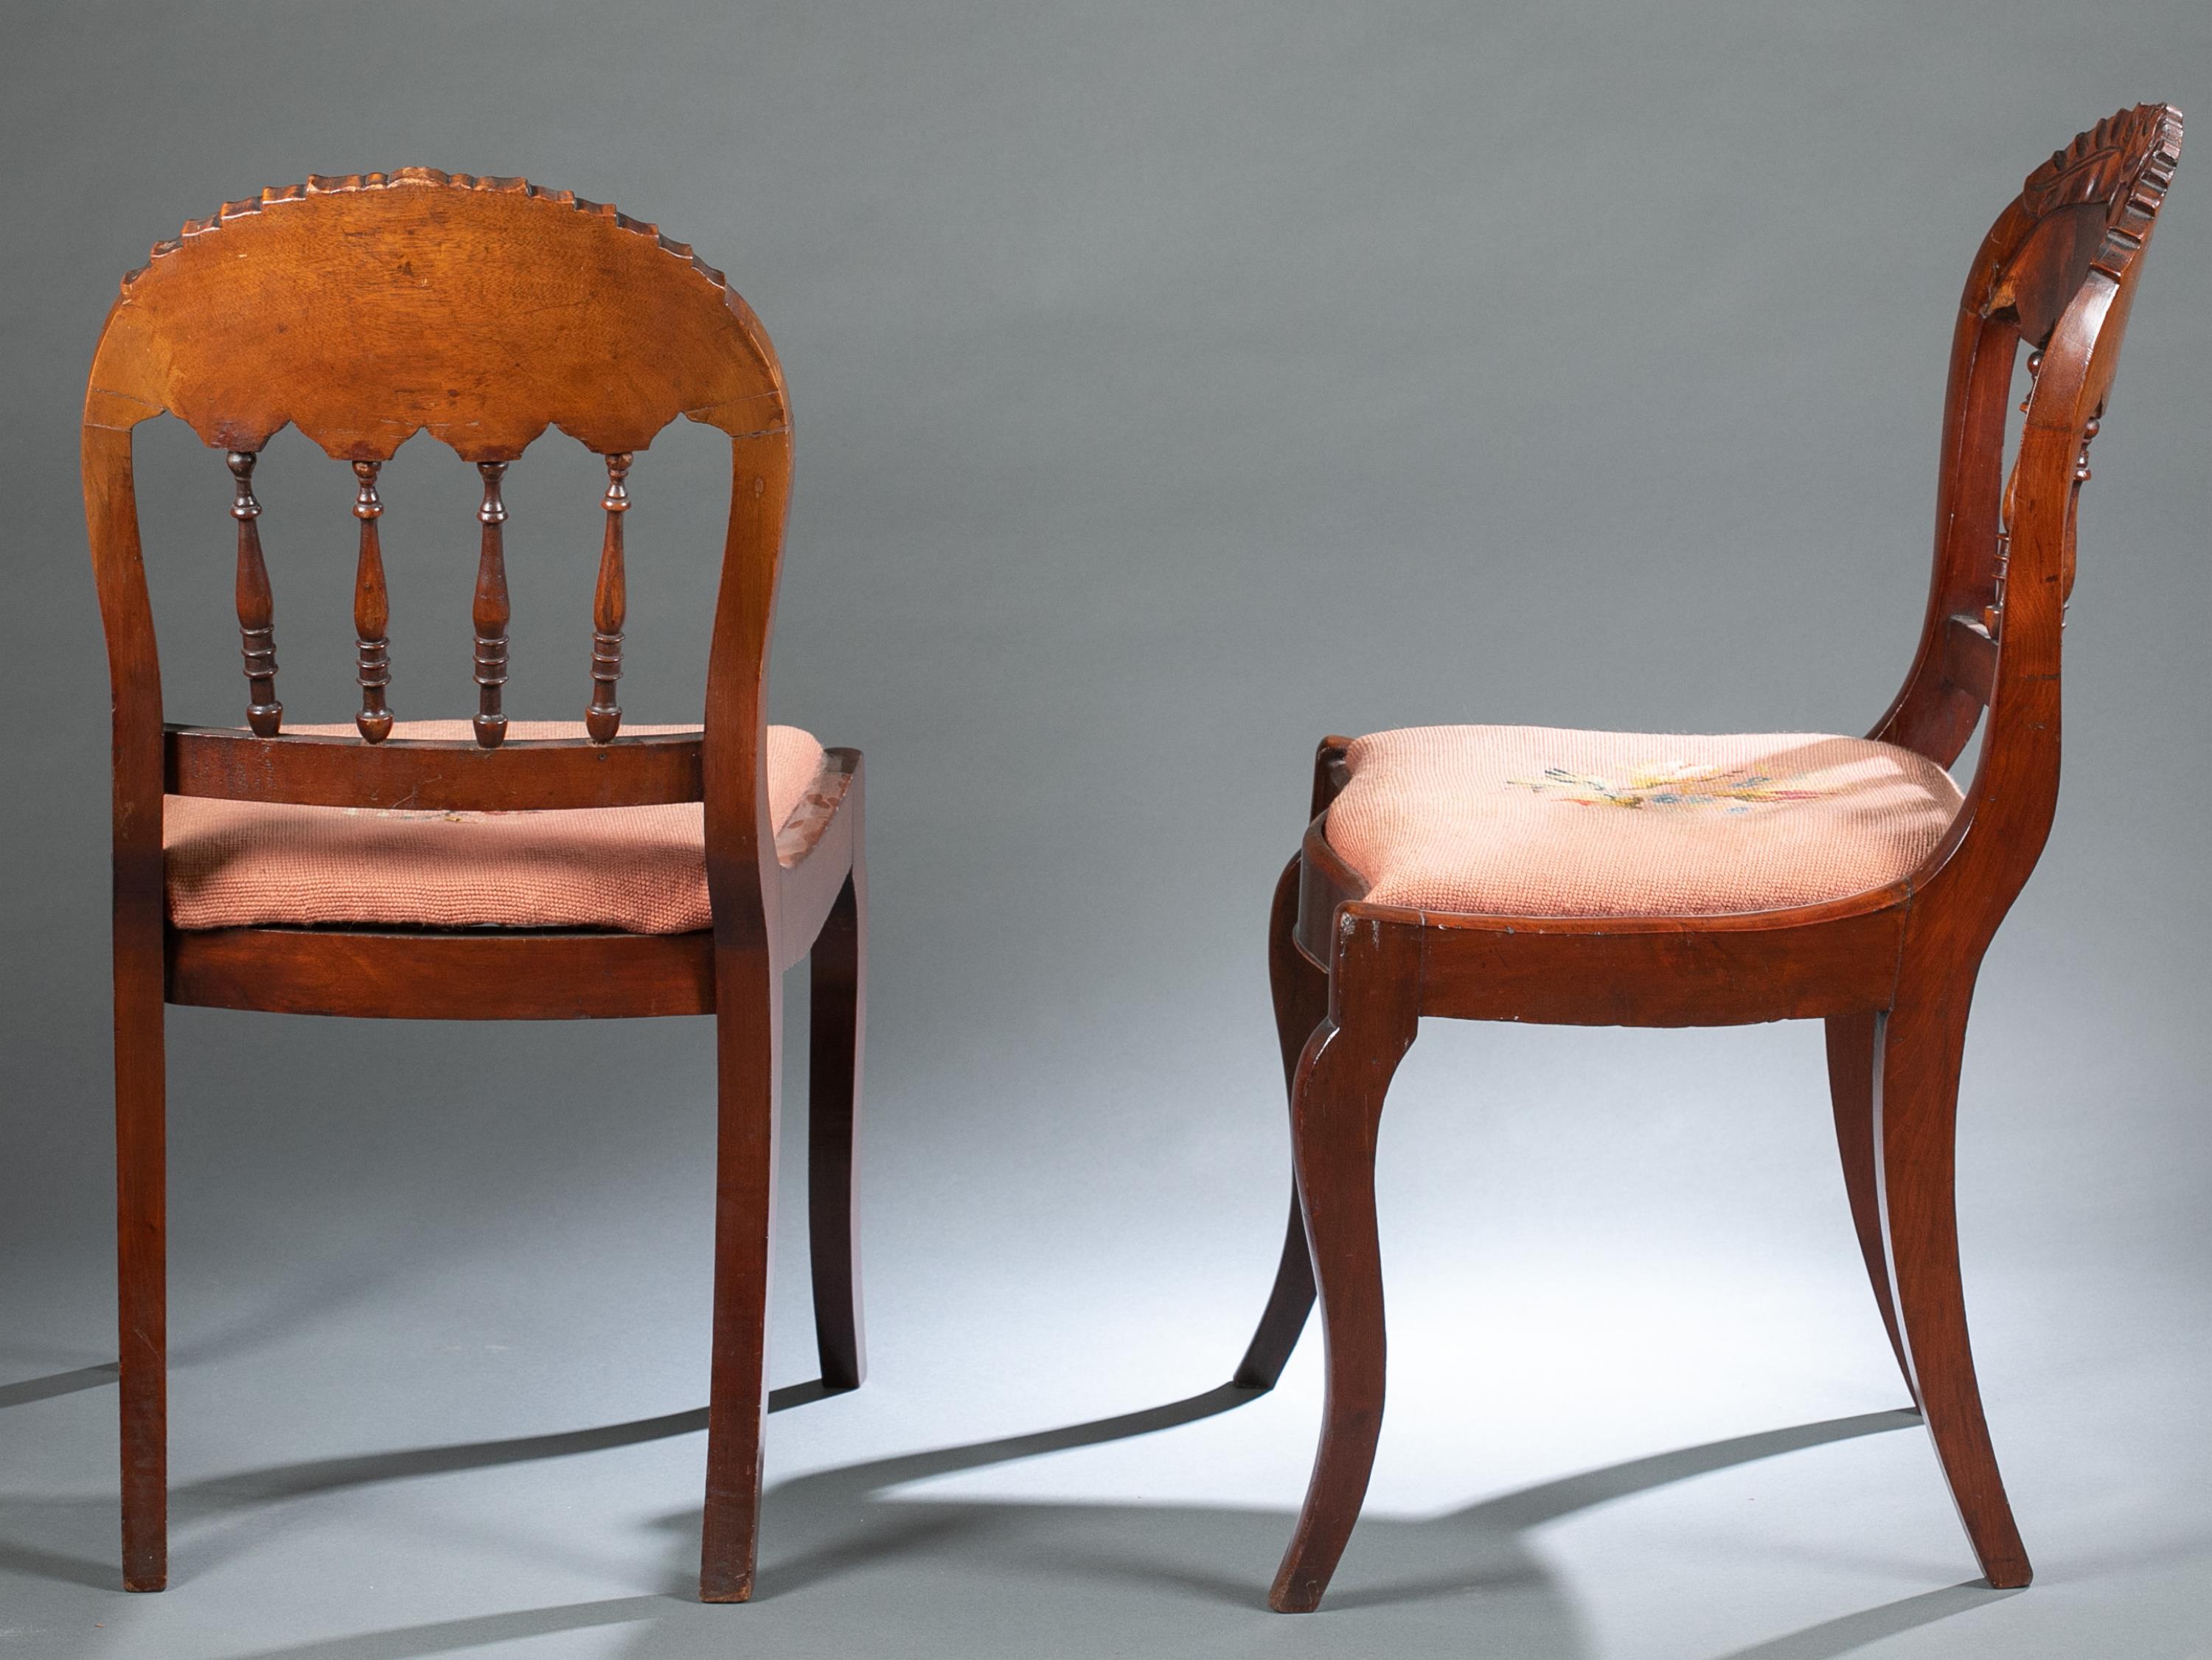 Pair of Gothic Revival sidechairs, c. 1850-70. - Image 6 of 6